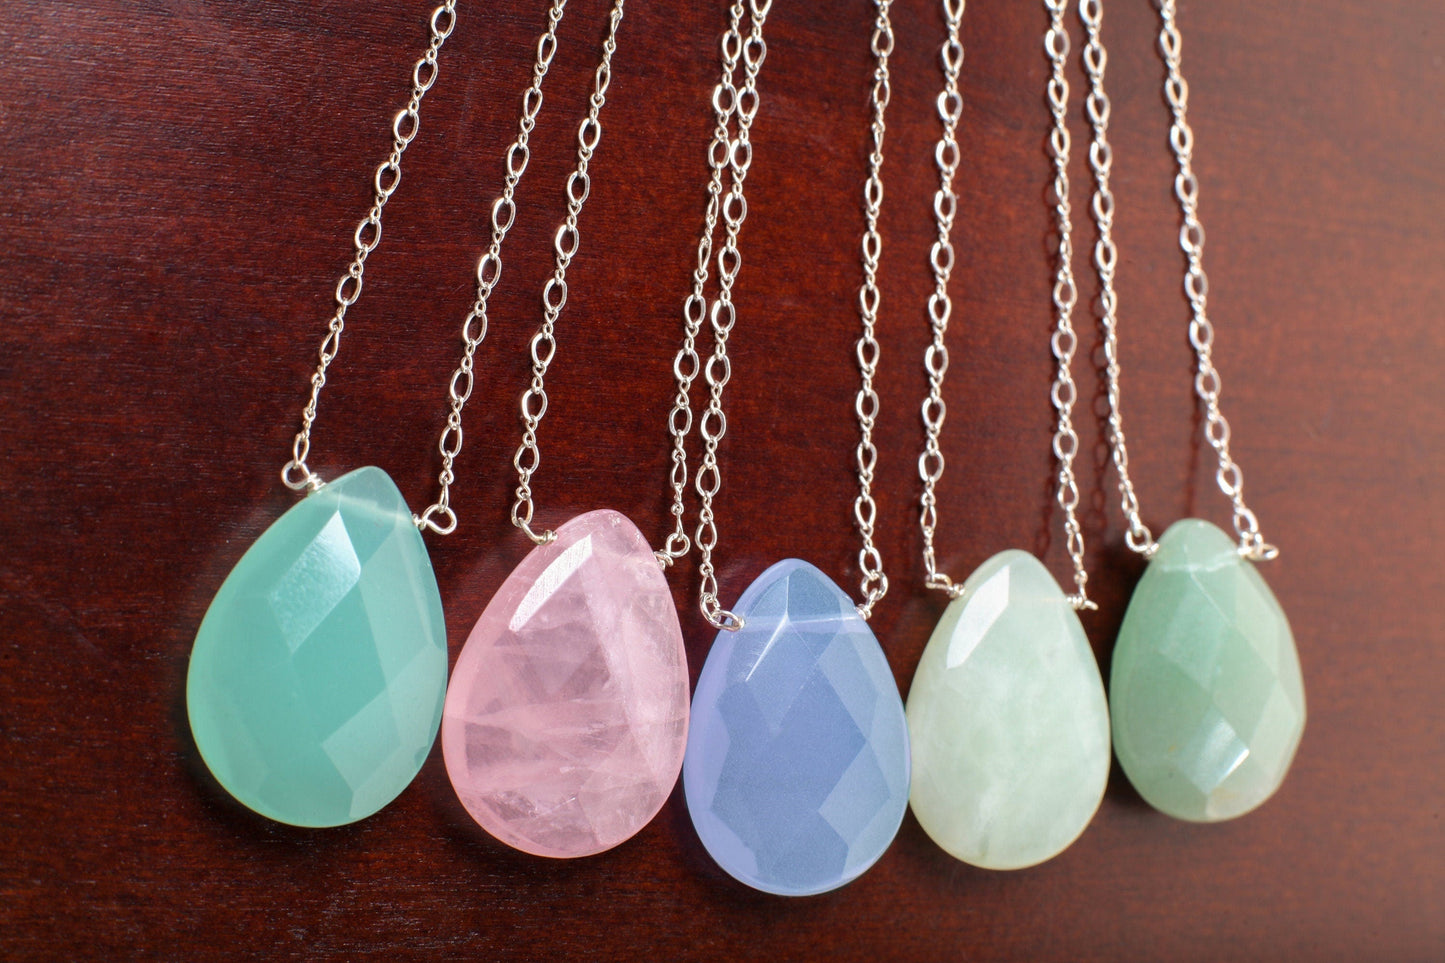 Natural Gemstones Faceted Pear Drop 22x30mm, Aqua Chalcedony,Rose Quartz, Chalcedony, Nephrite Jade, Aventurine in 925 Sterling Silver Chain